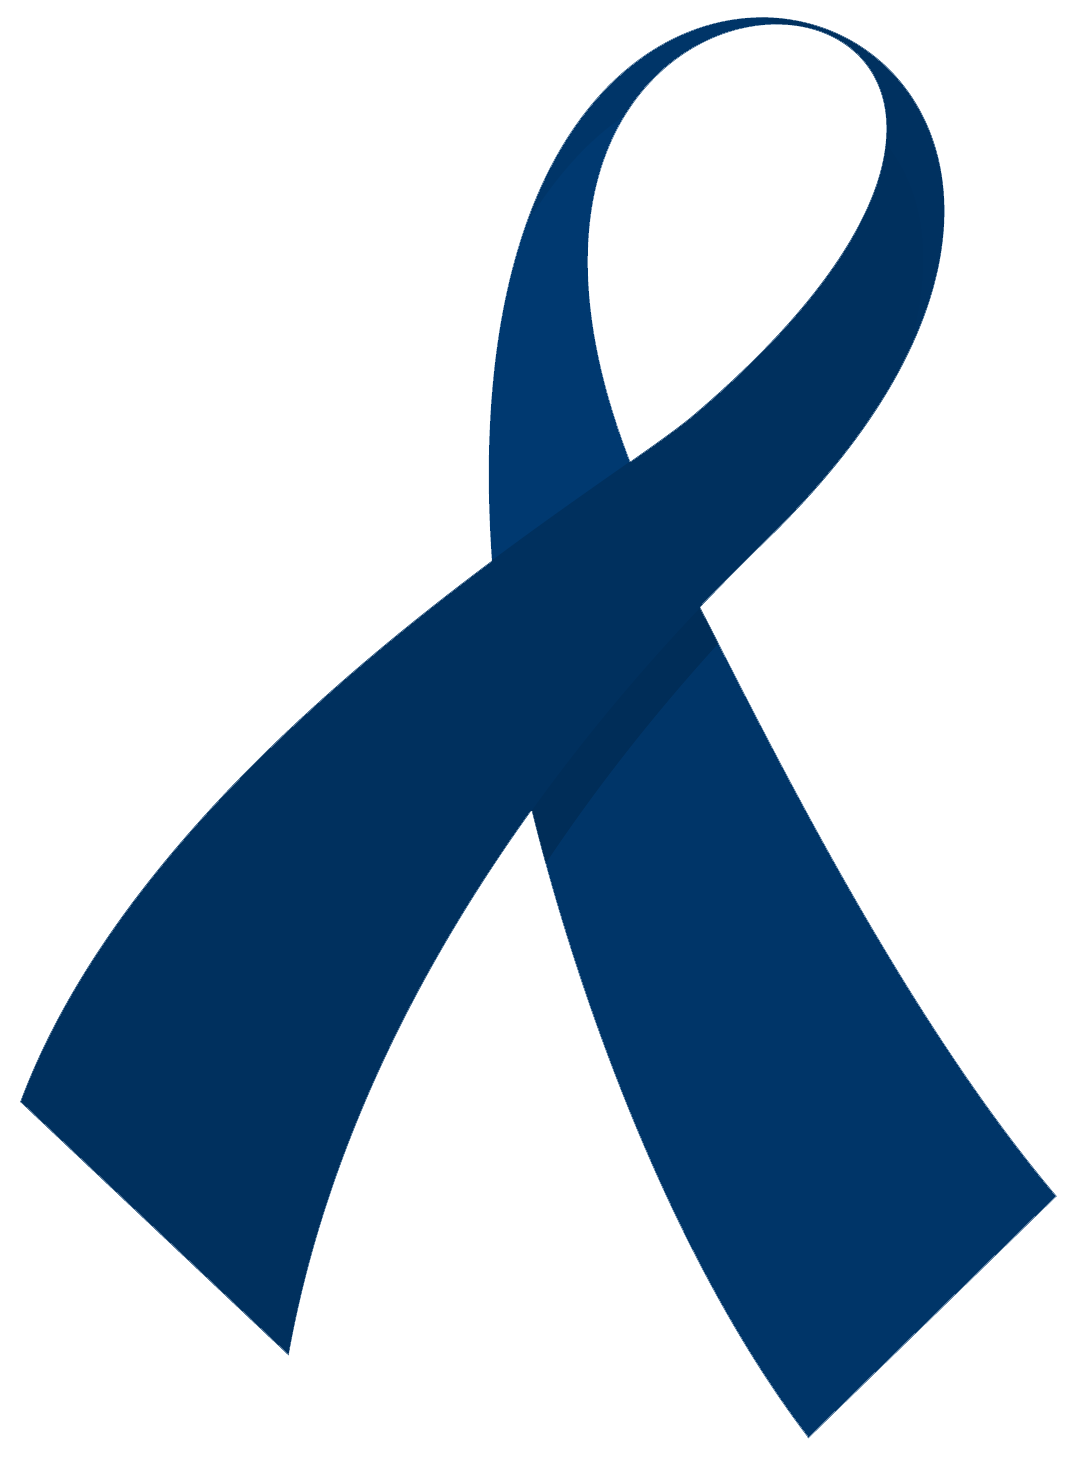 Colon Cancer Picture | Colon Cancer Awareness Pictures Wallpaper ...